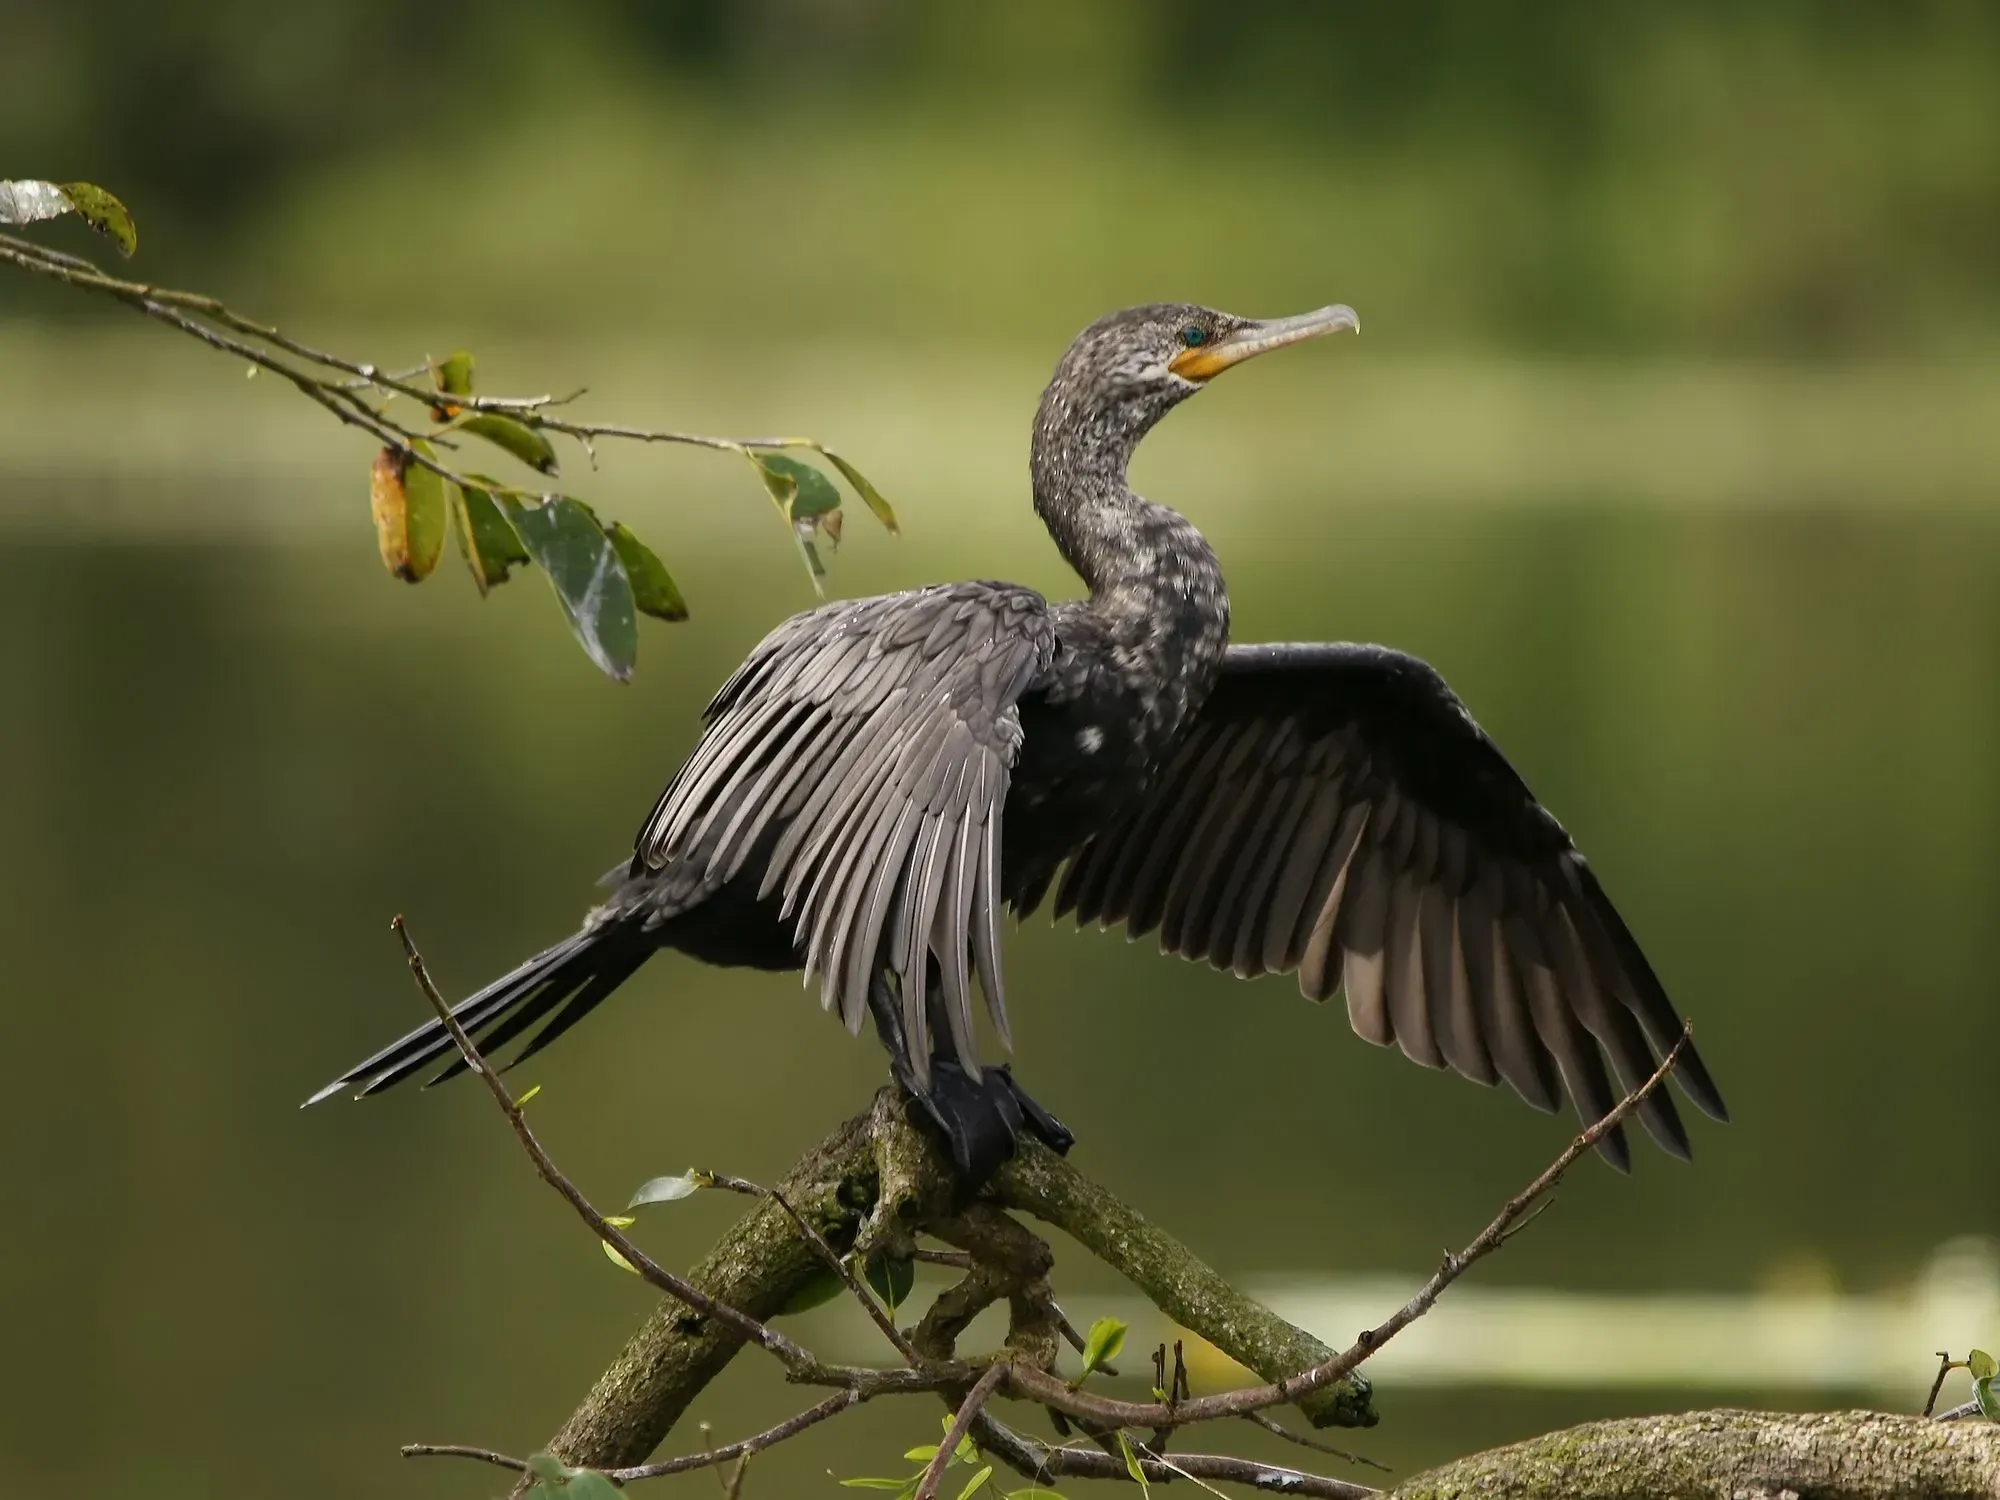 A Neotropic cormorant on a branch of a tree.